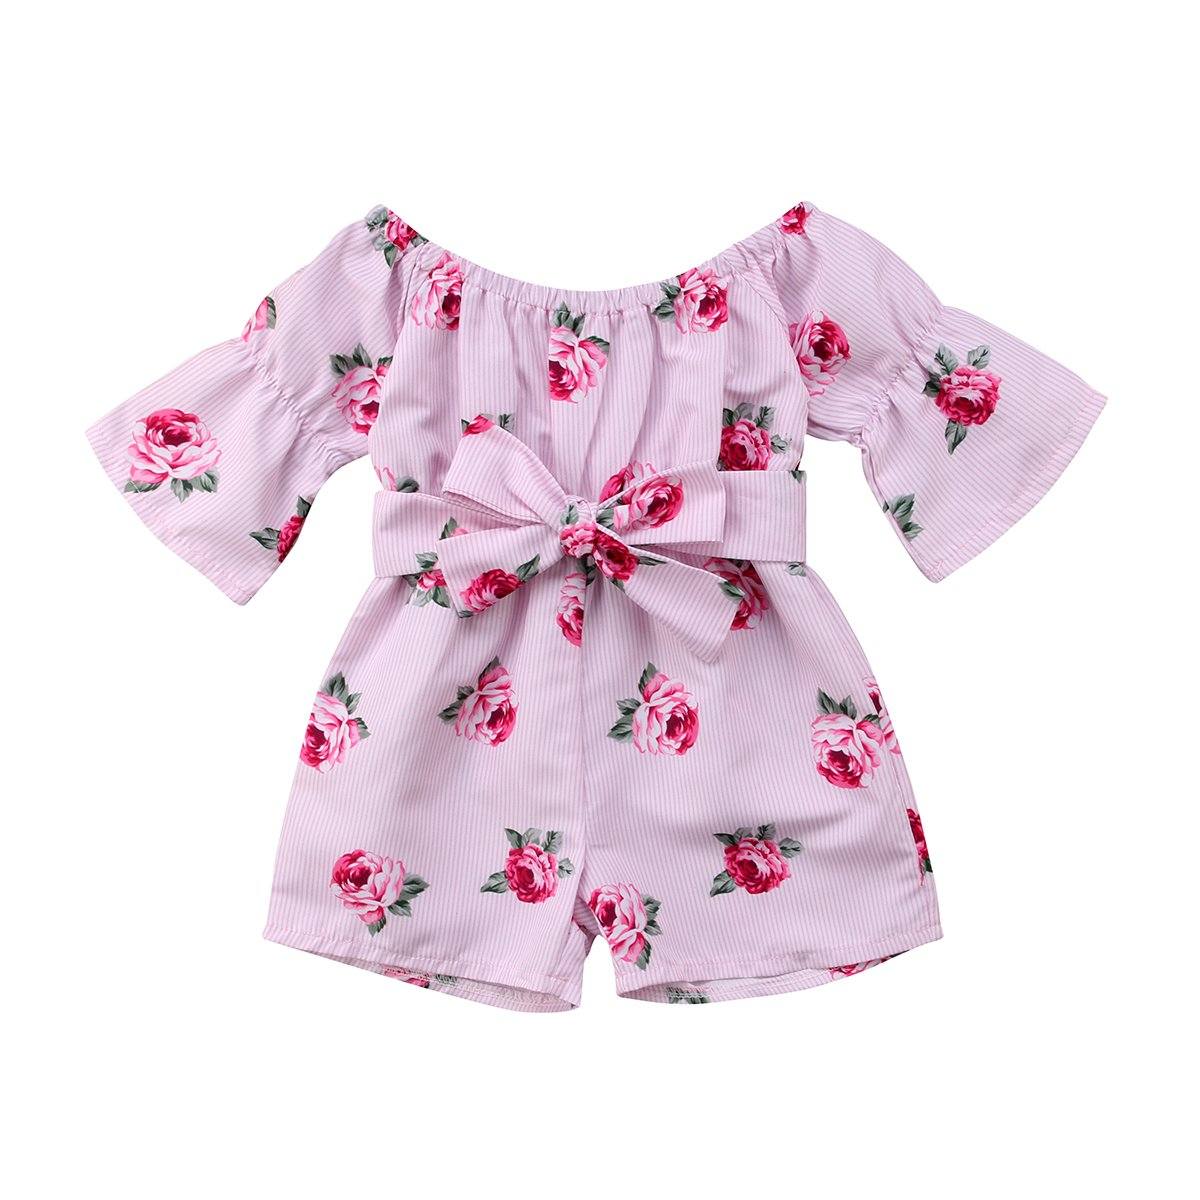 Floral Striped Romper - The Trendy Toddlers